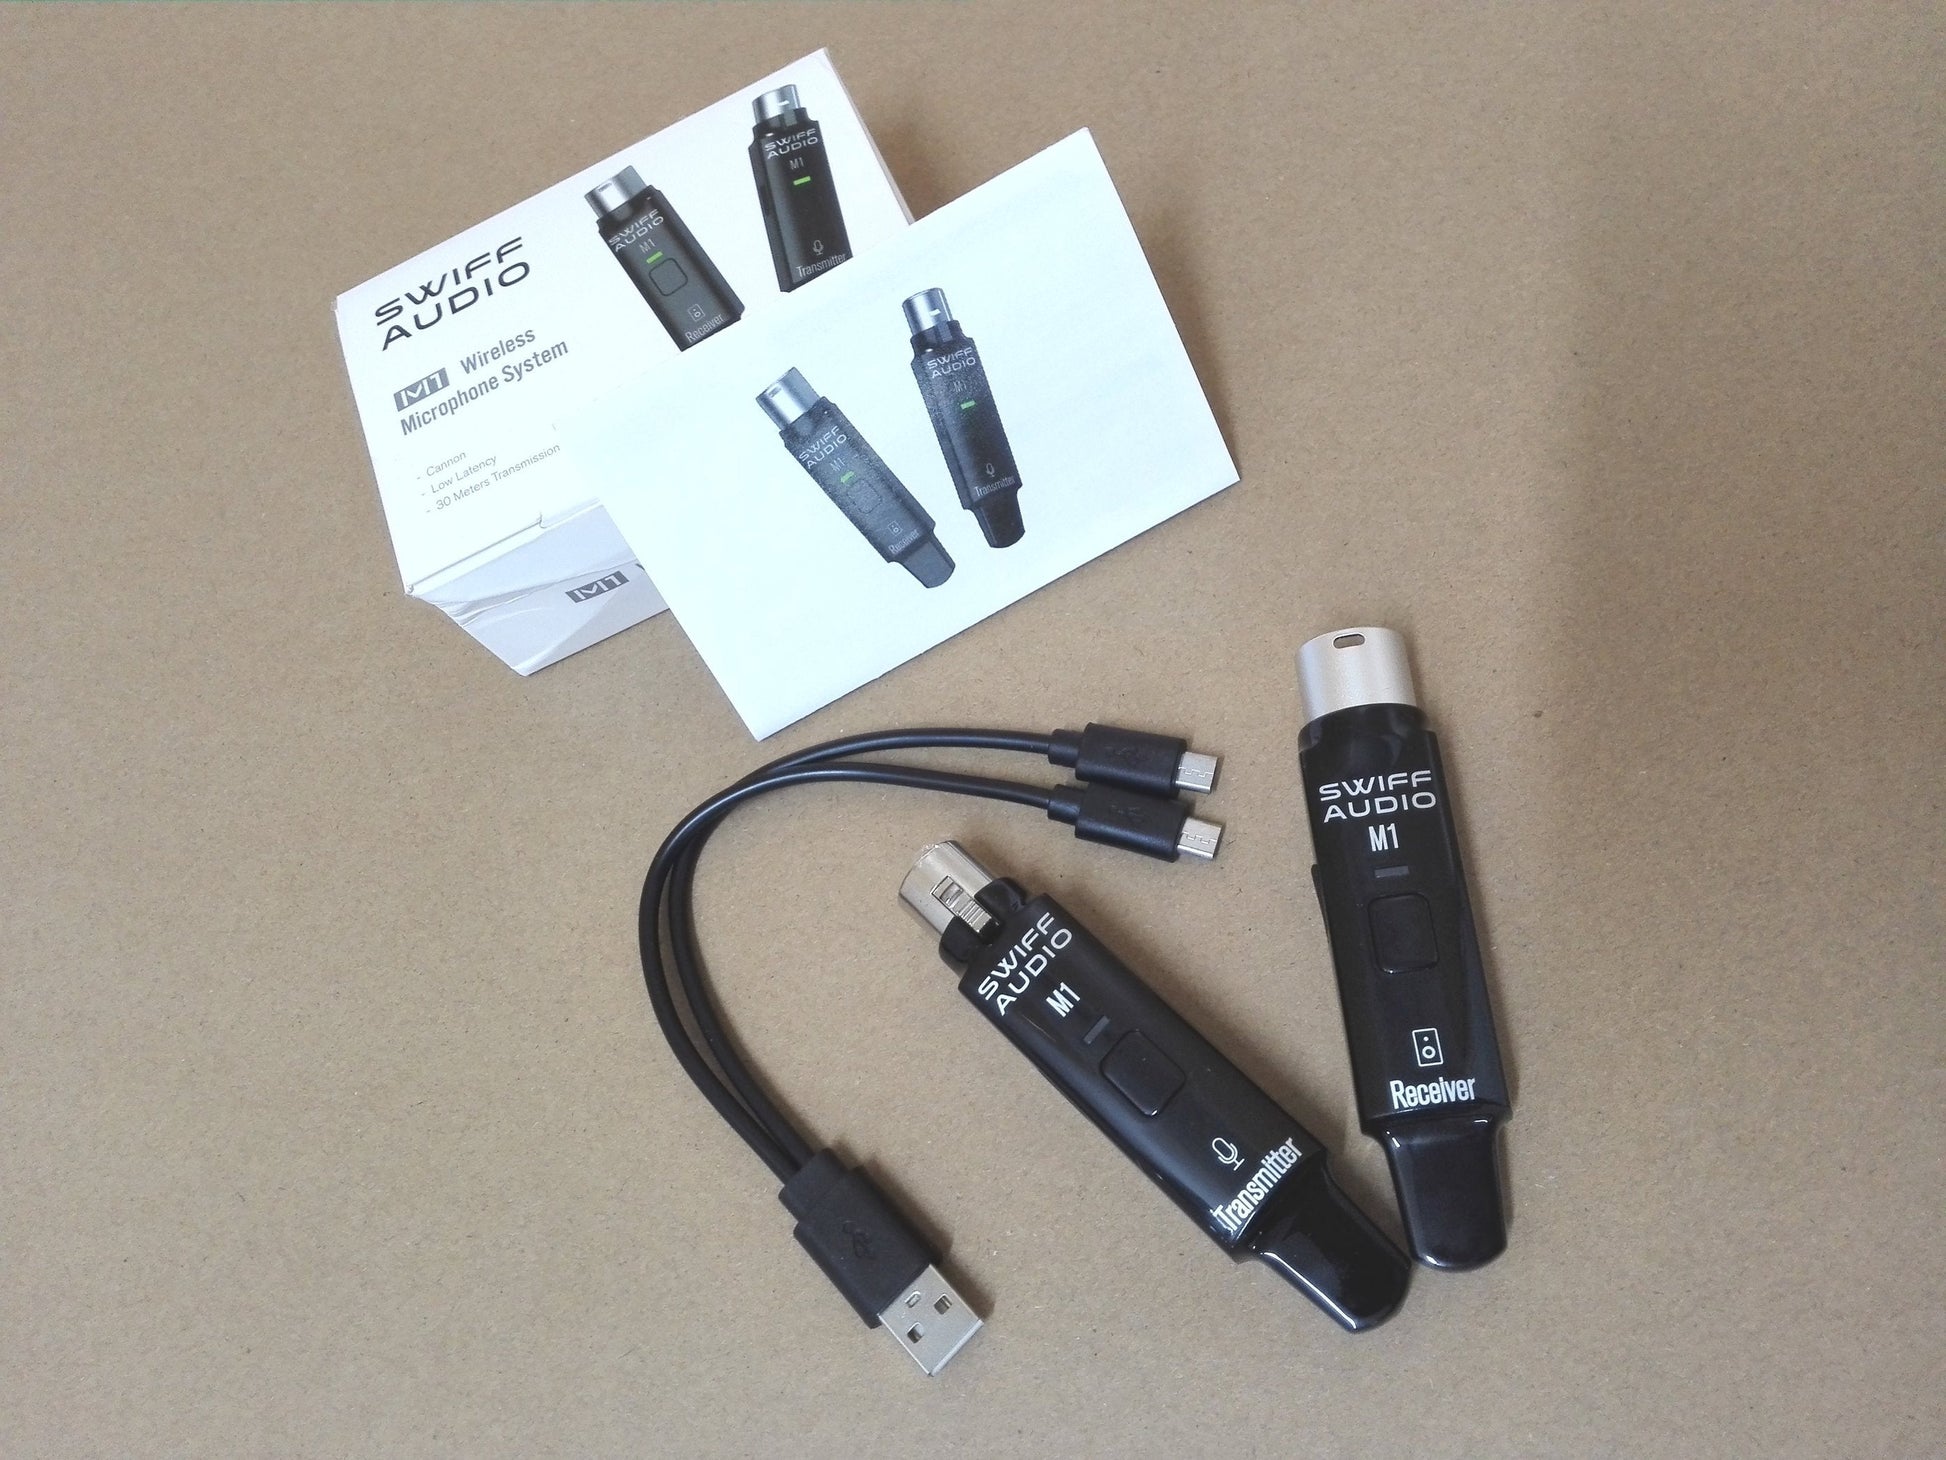 Swiff Audio M1 2.4GHz Microphone Wireless System,R1+T1,Rechargeable-Gloss Black